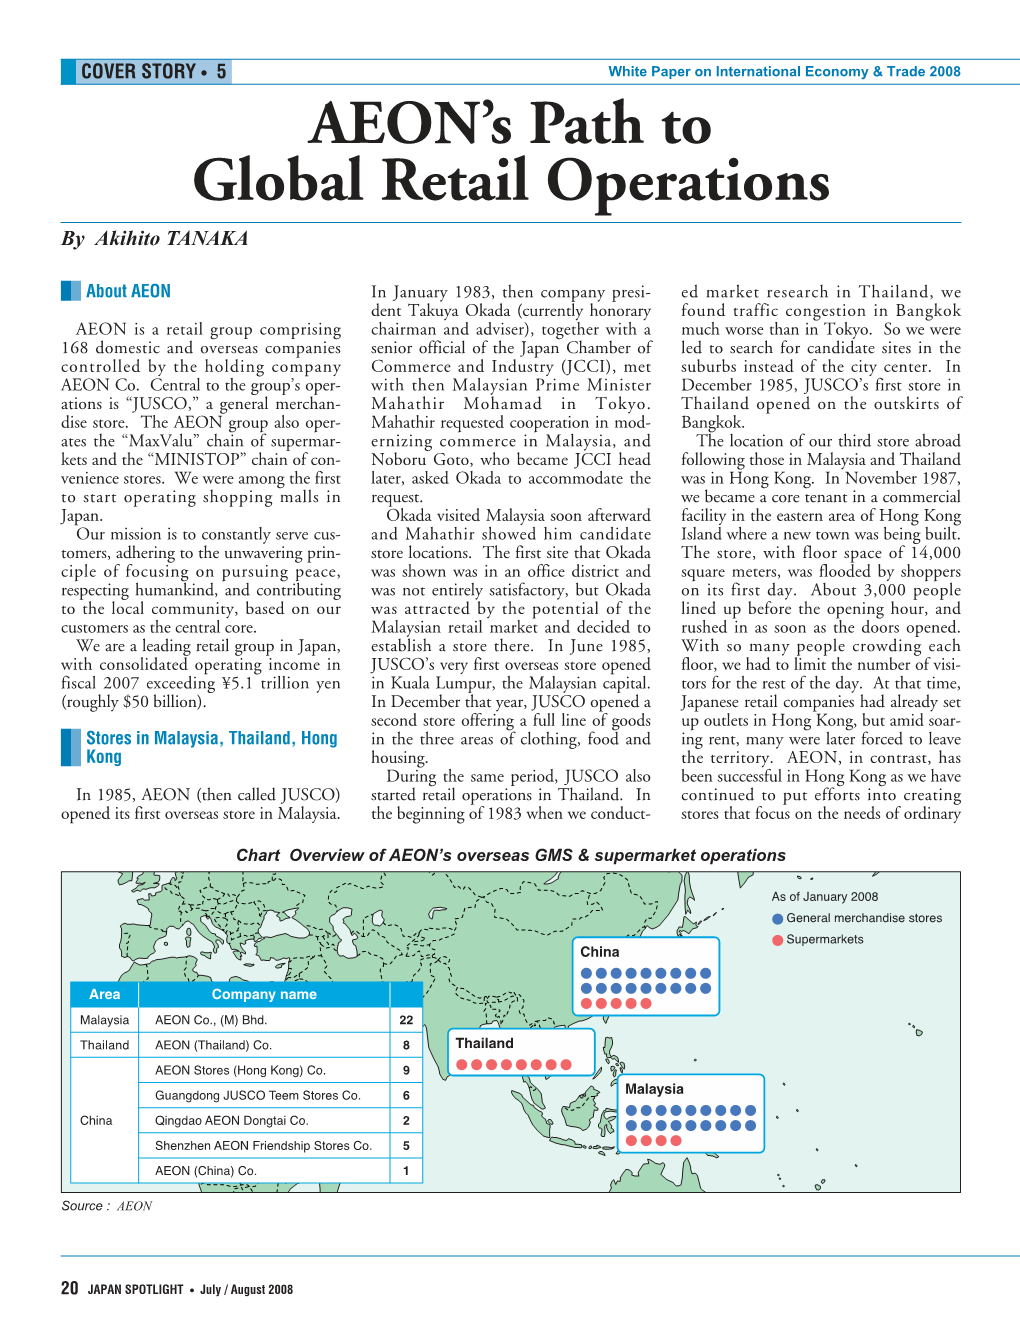 AEON's Path to Global Retail Operations